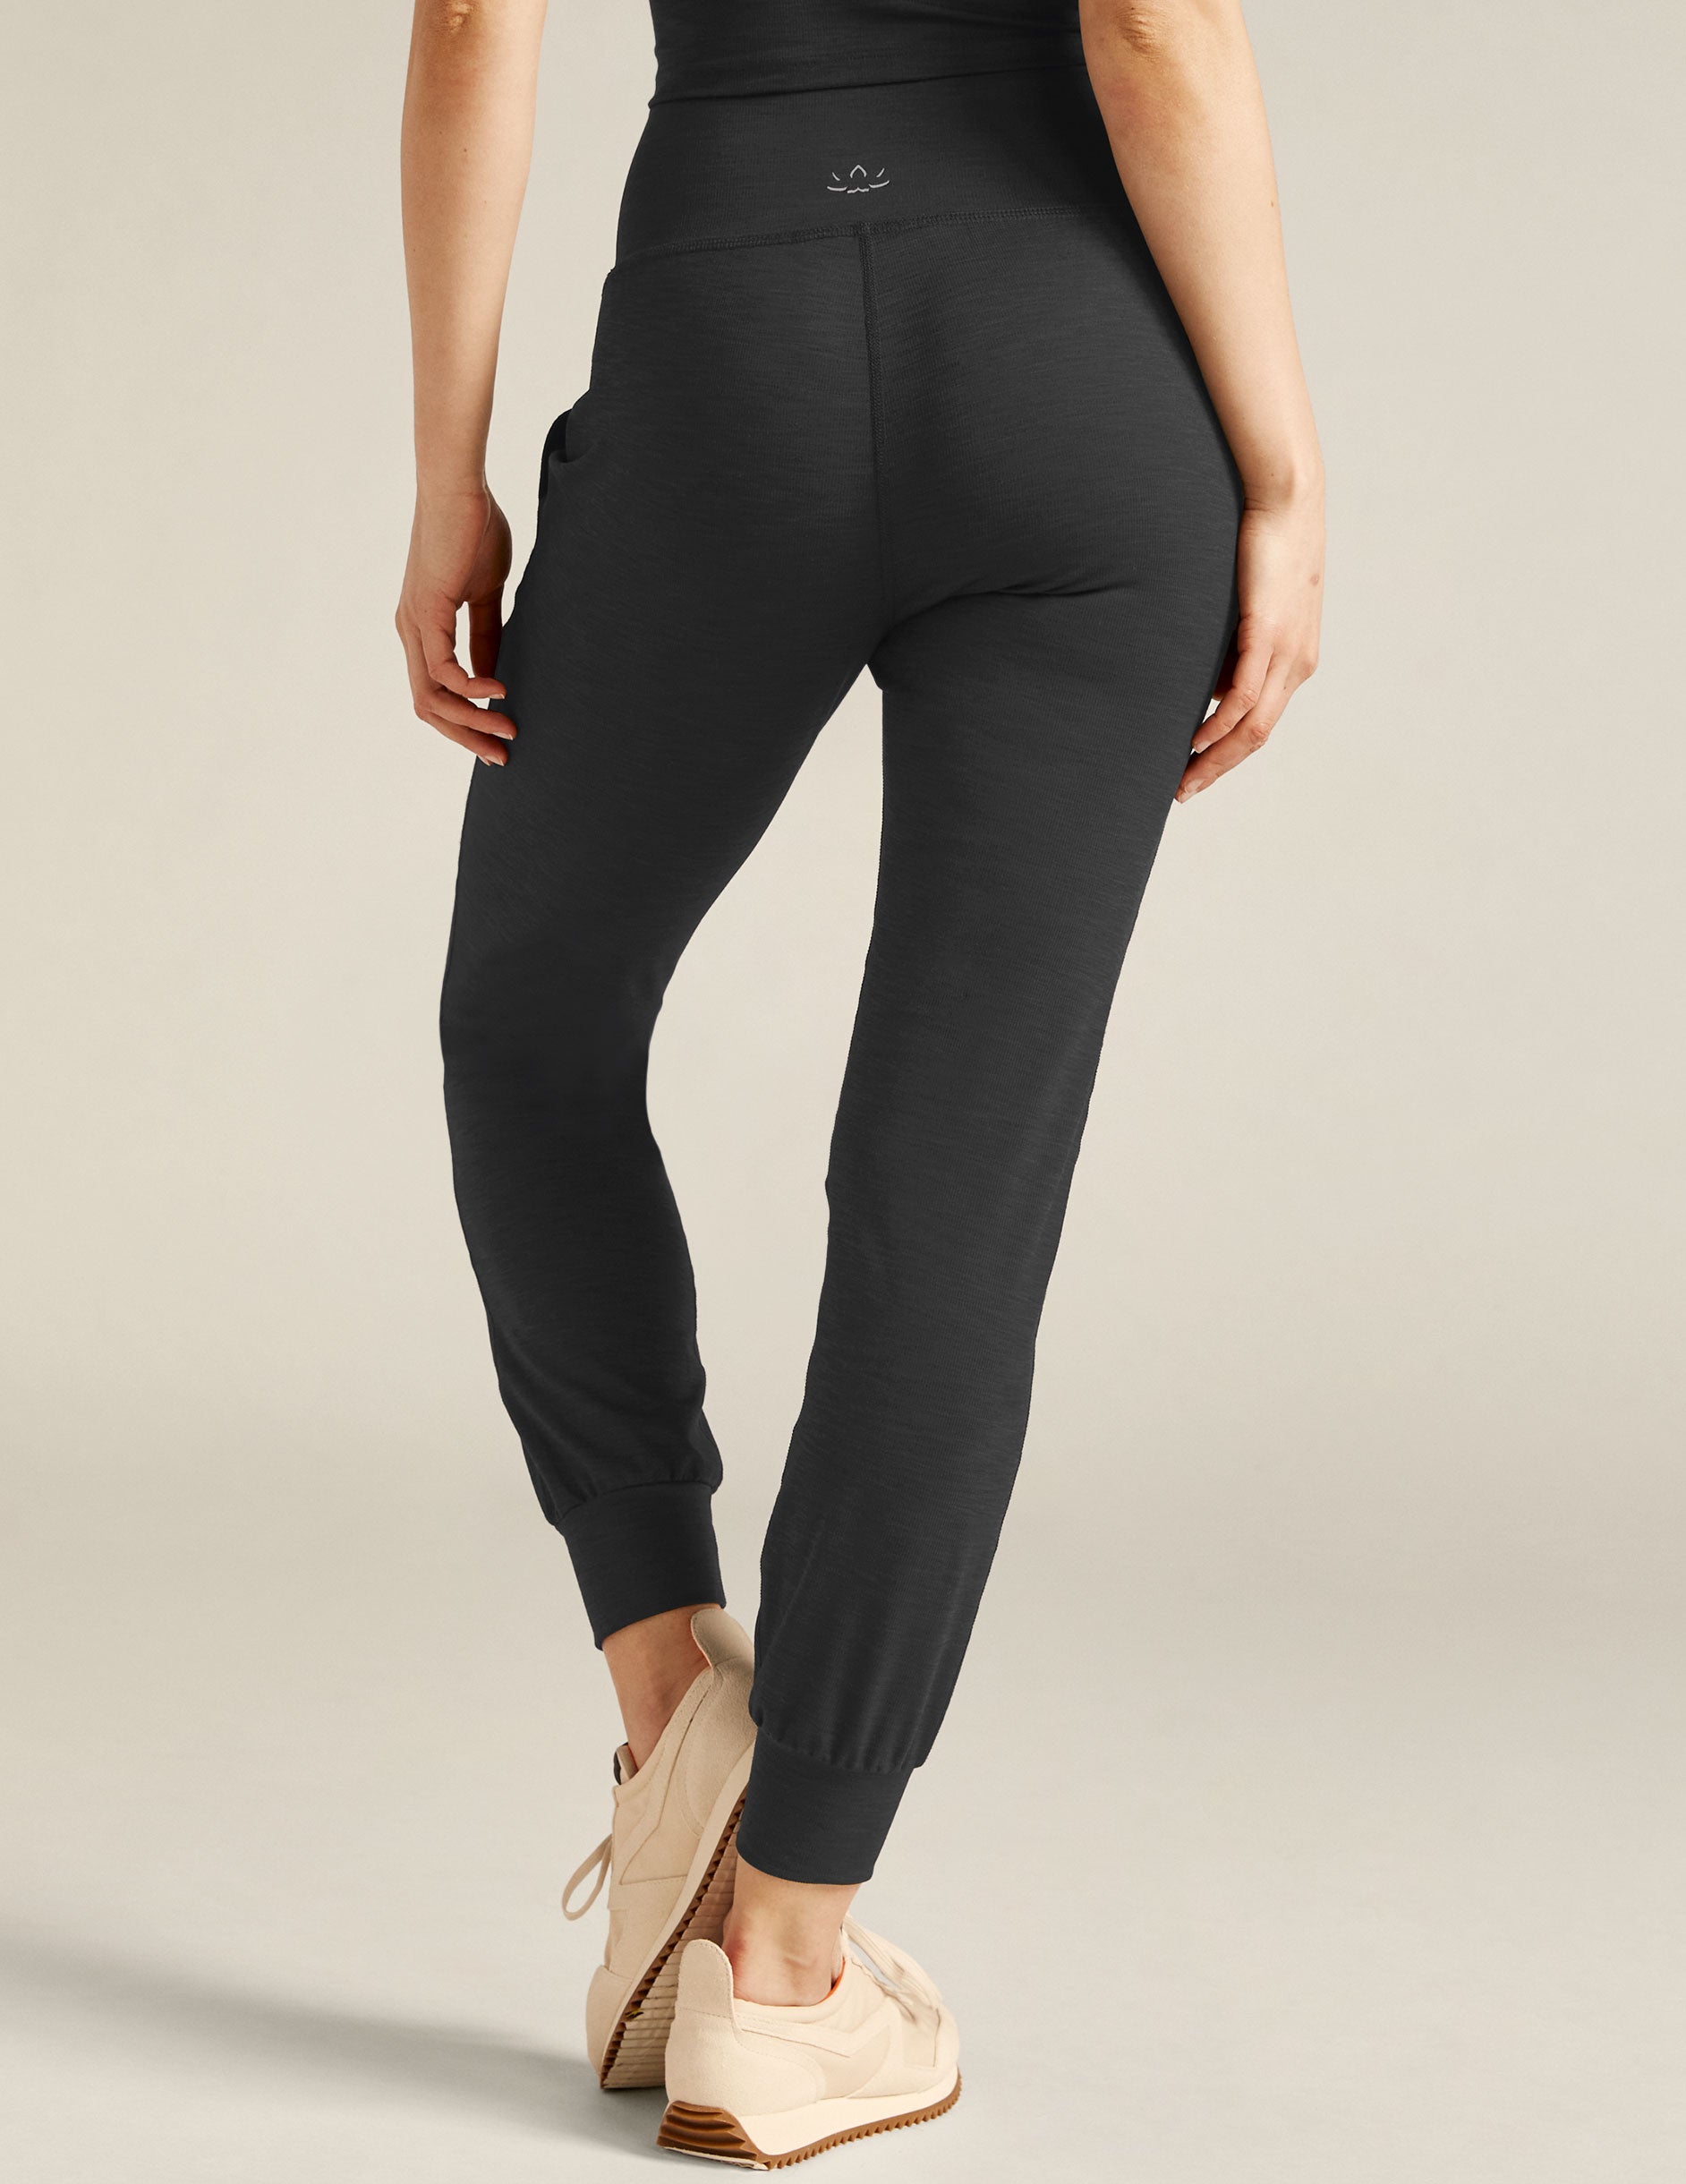 Beyond Yoga Lounge Around Jogger Pants NWT in Sunbeam Women's Size Medium -  $50 New With Tags - From Den